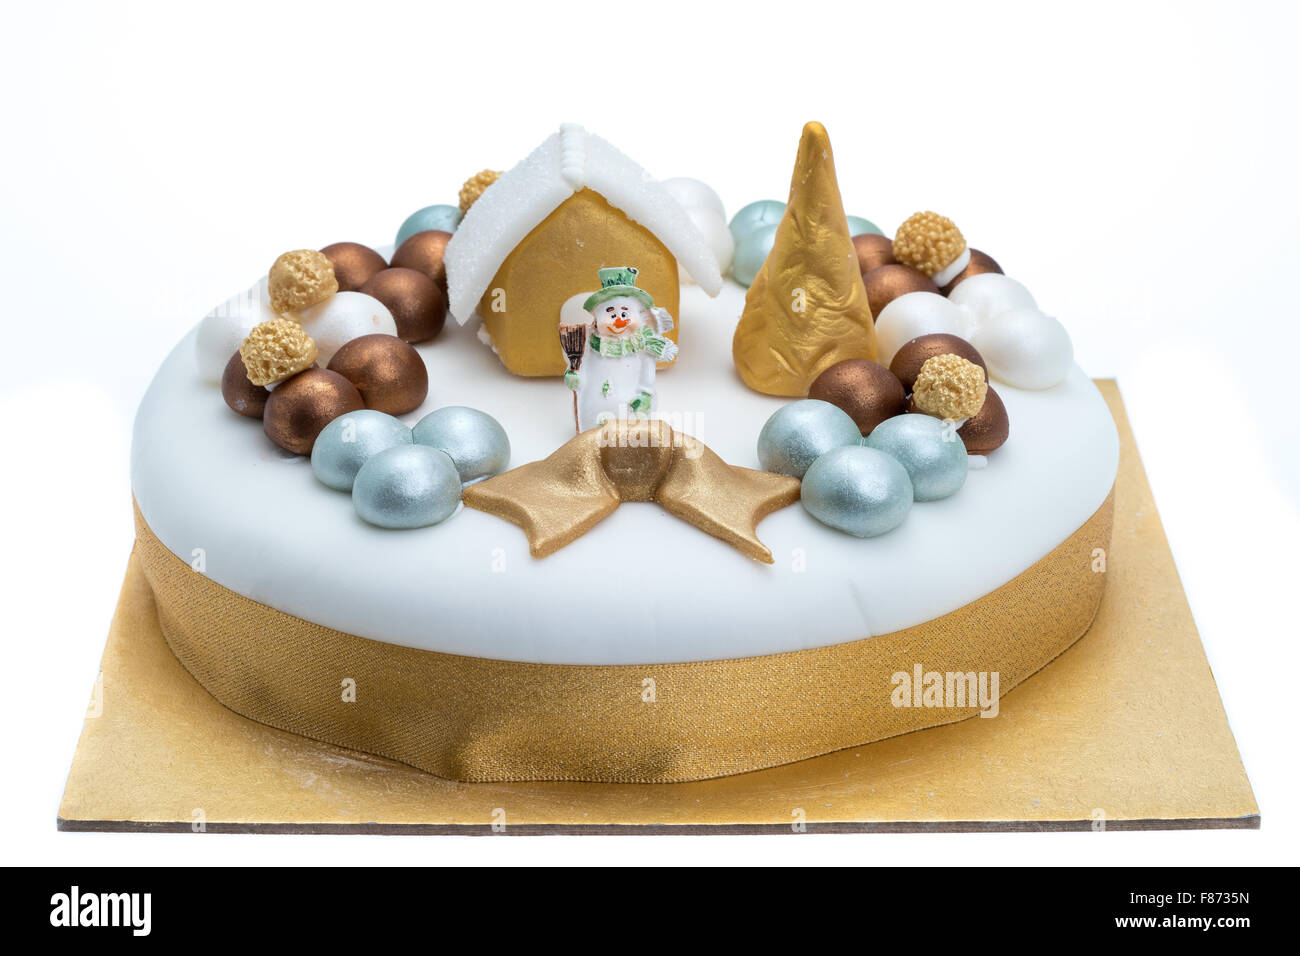 Christmas cake that has been decorated with Festive ornaments - studio shot with a white background Stock Photo